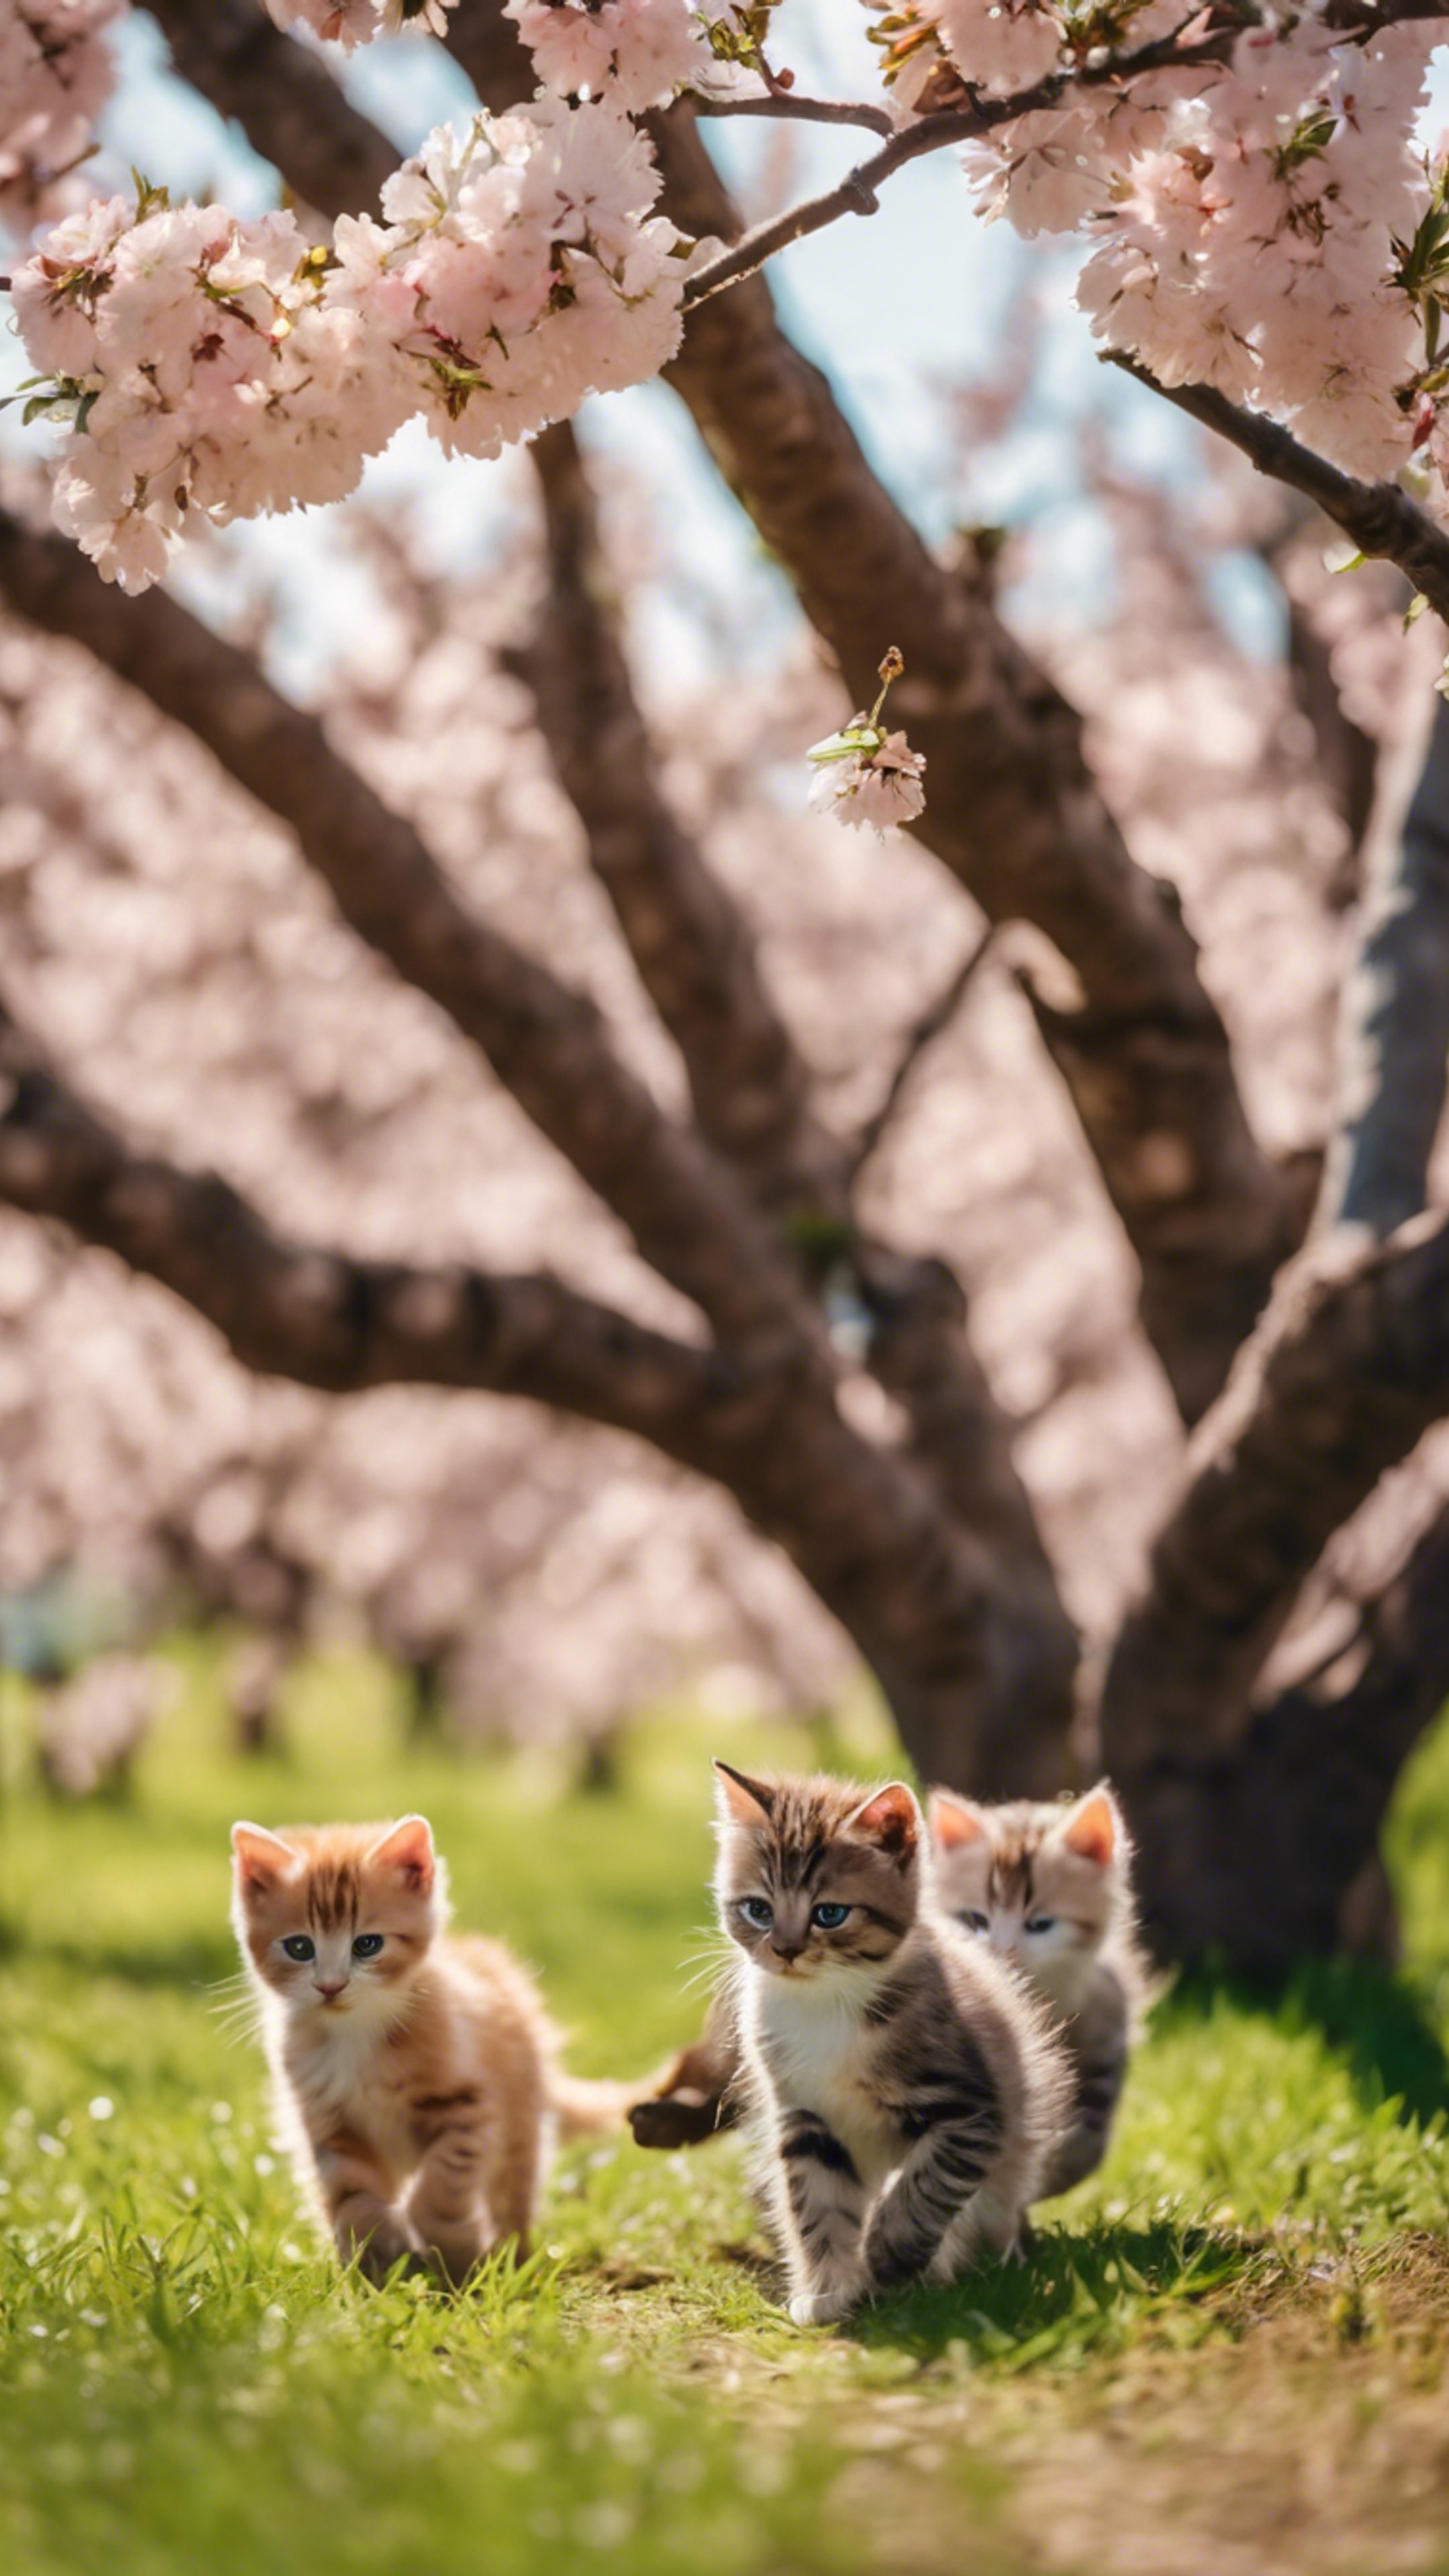 A group of multi-colored kittens chasing their shadows under a peach tree during a beautiful spring afternoon. Papel de parede[1b8583aedfab46758668]